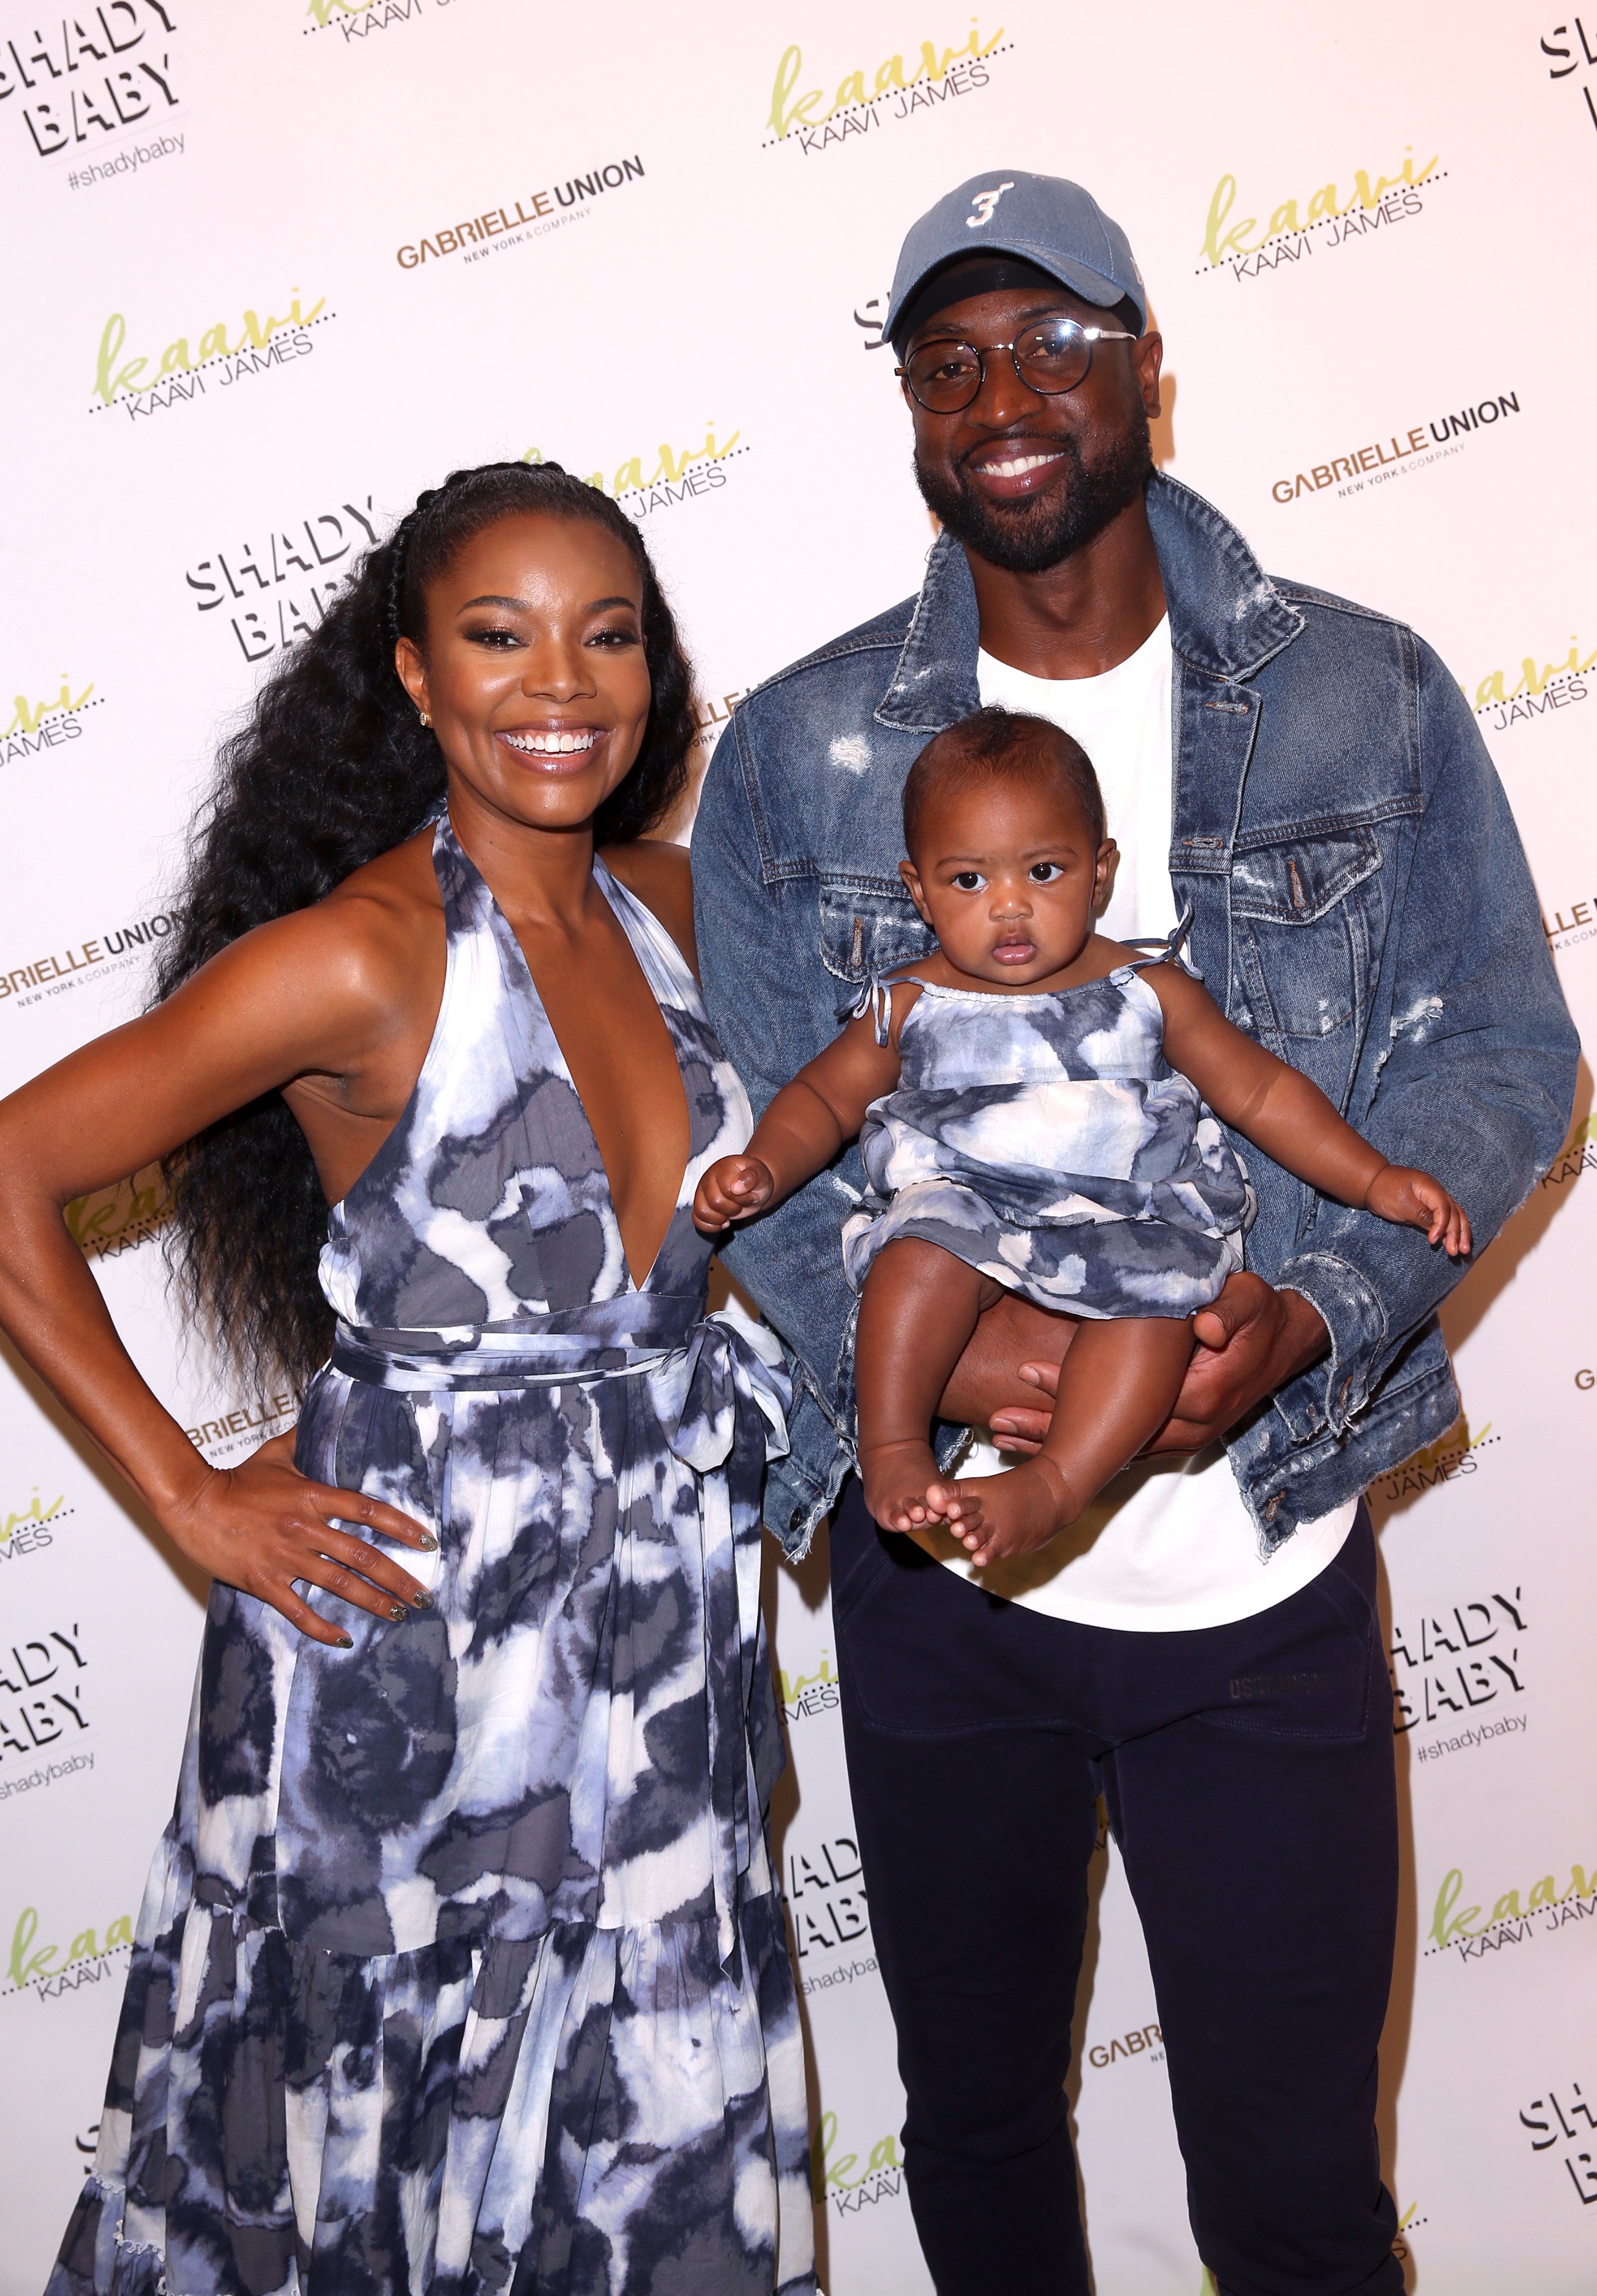 Gabrielle Union and husband Dwayne Wade with daughter Kaavia James as they visit New York & Company Store in Burbank, California on May 9, 2019 | Photo: Getty Images